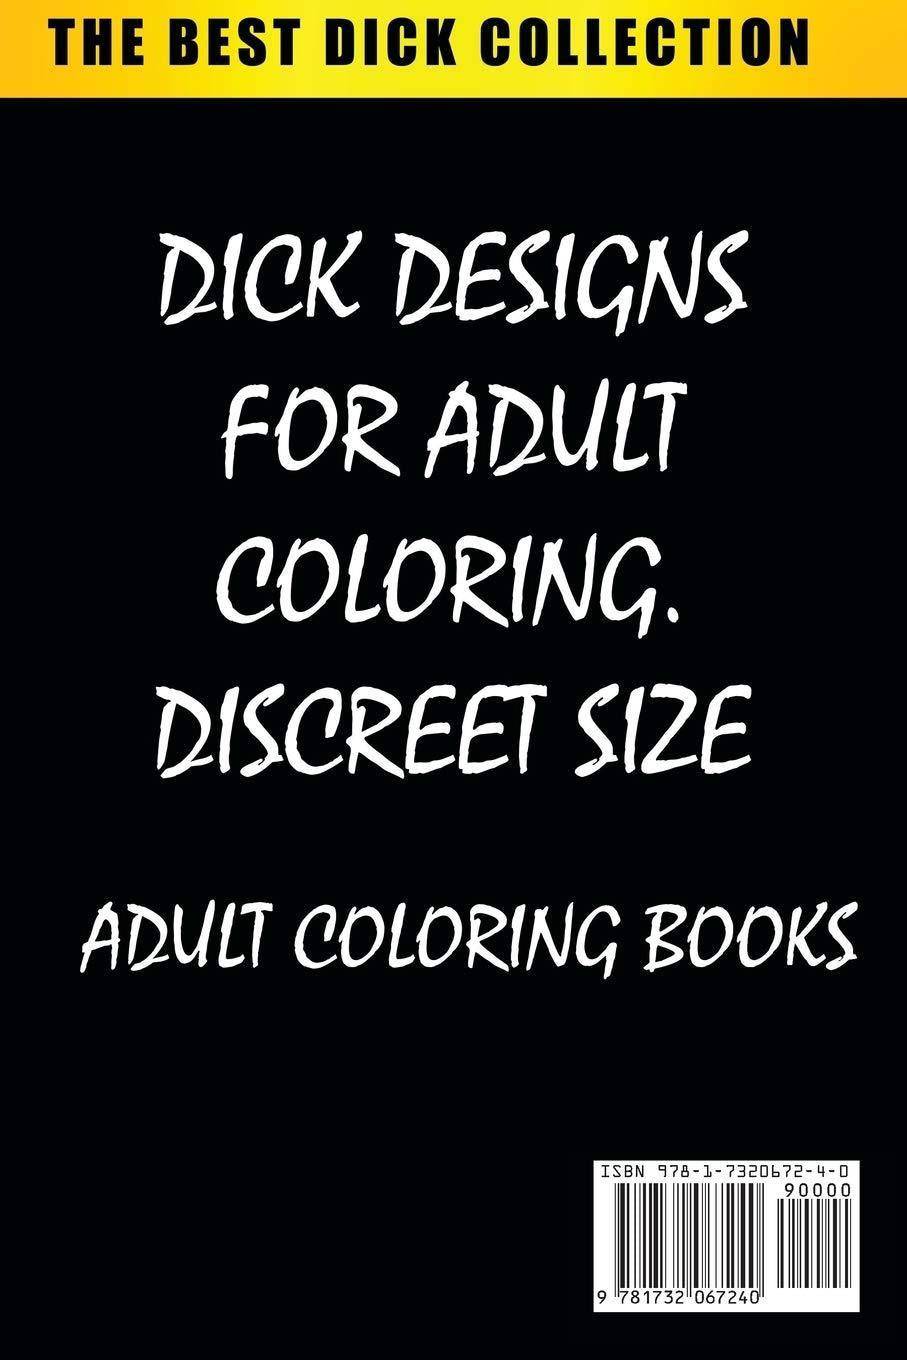 Adult Coloring Book: Glorious Dicks: Extreme Stress Relieving Di - SureShot Books Publishing LLC